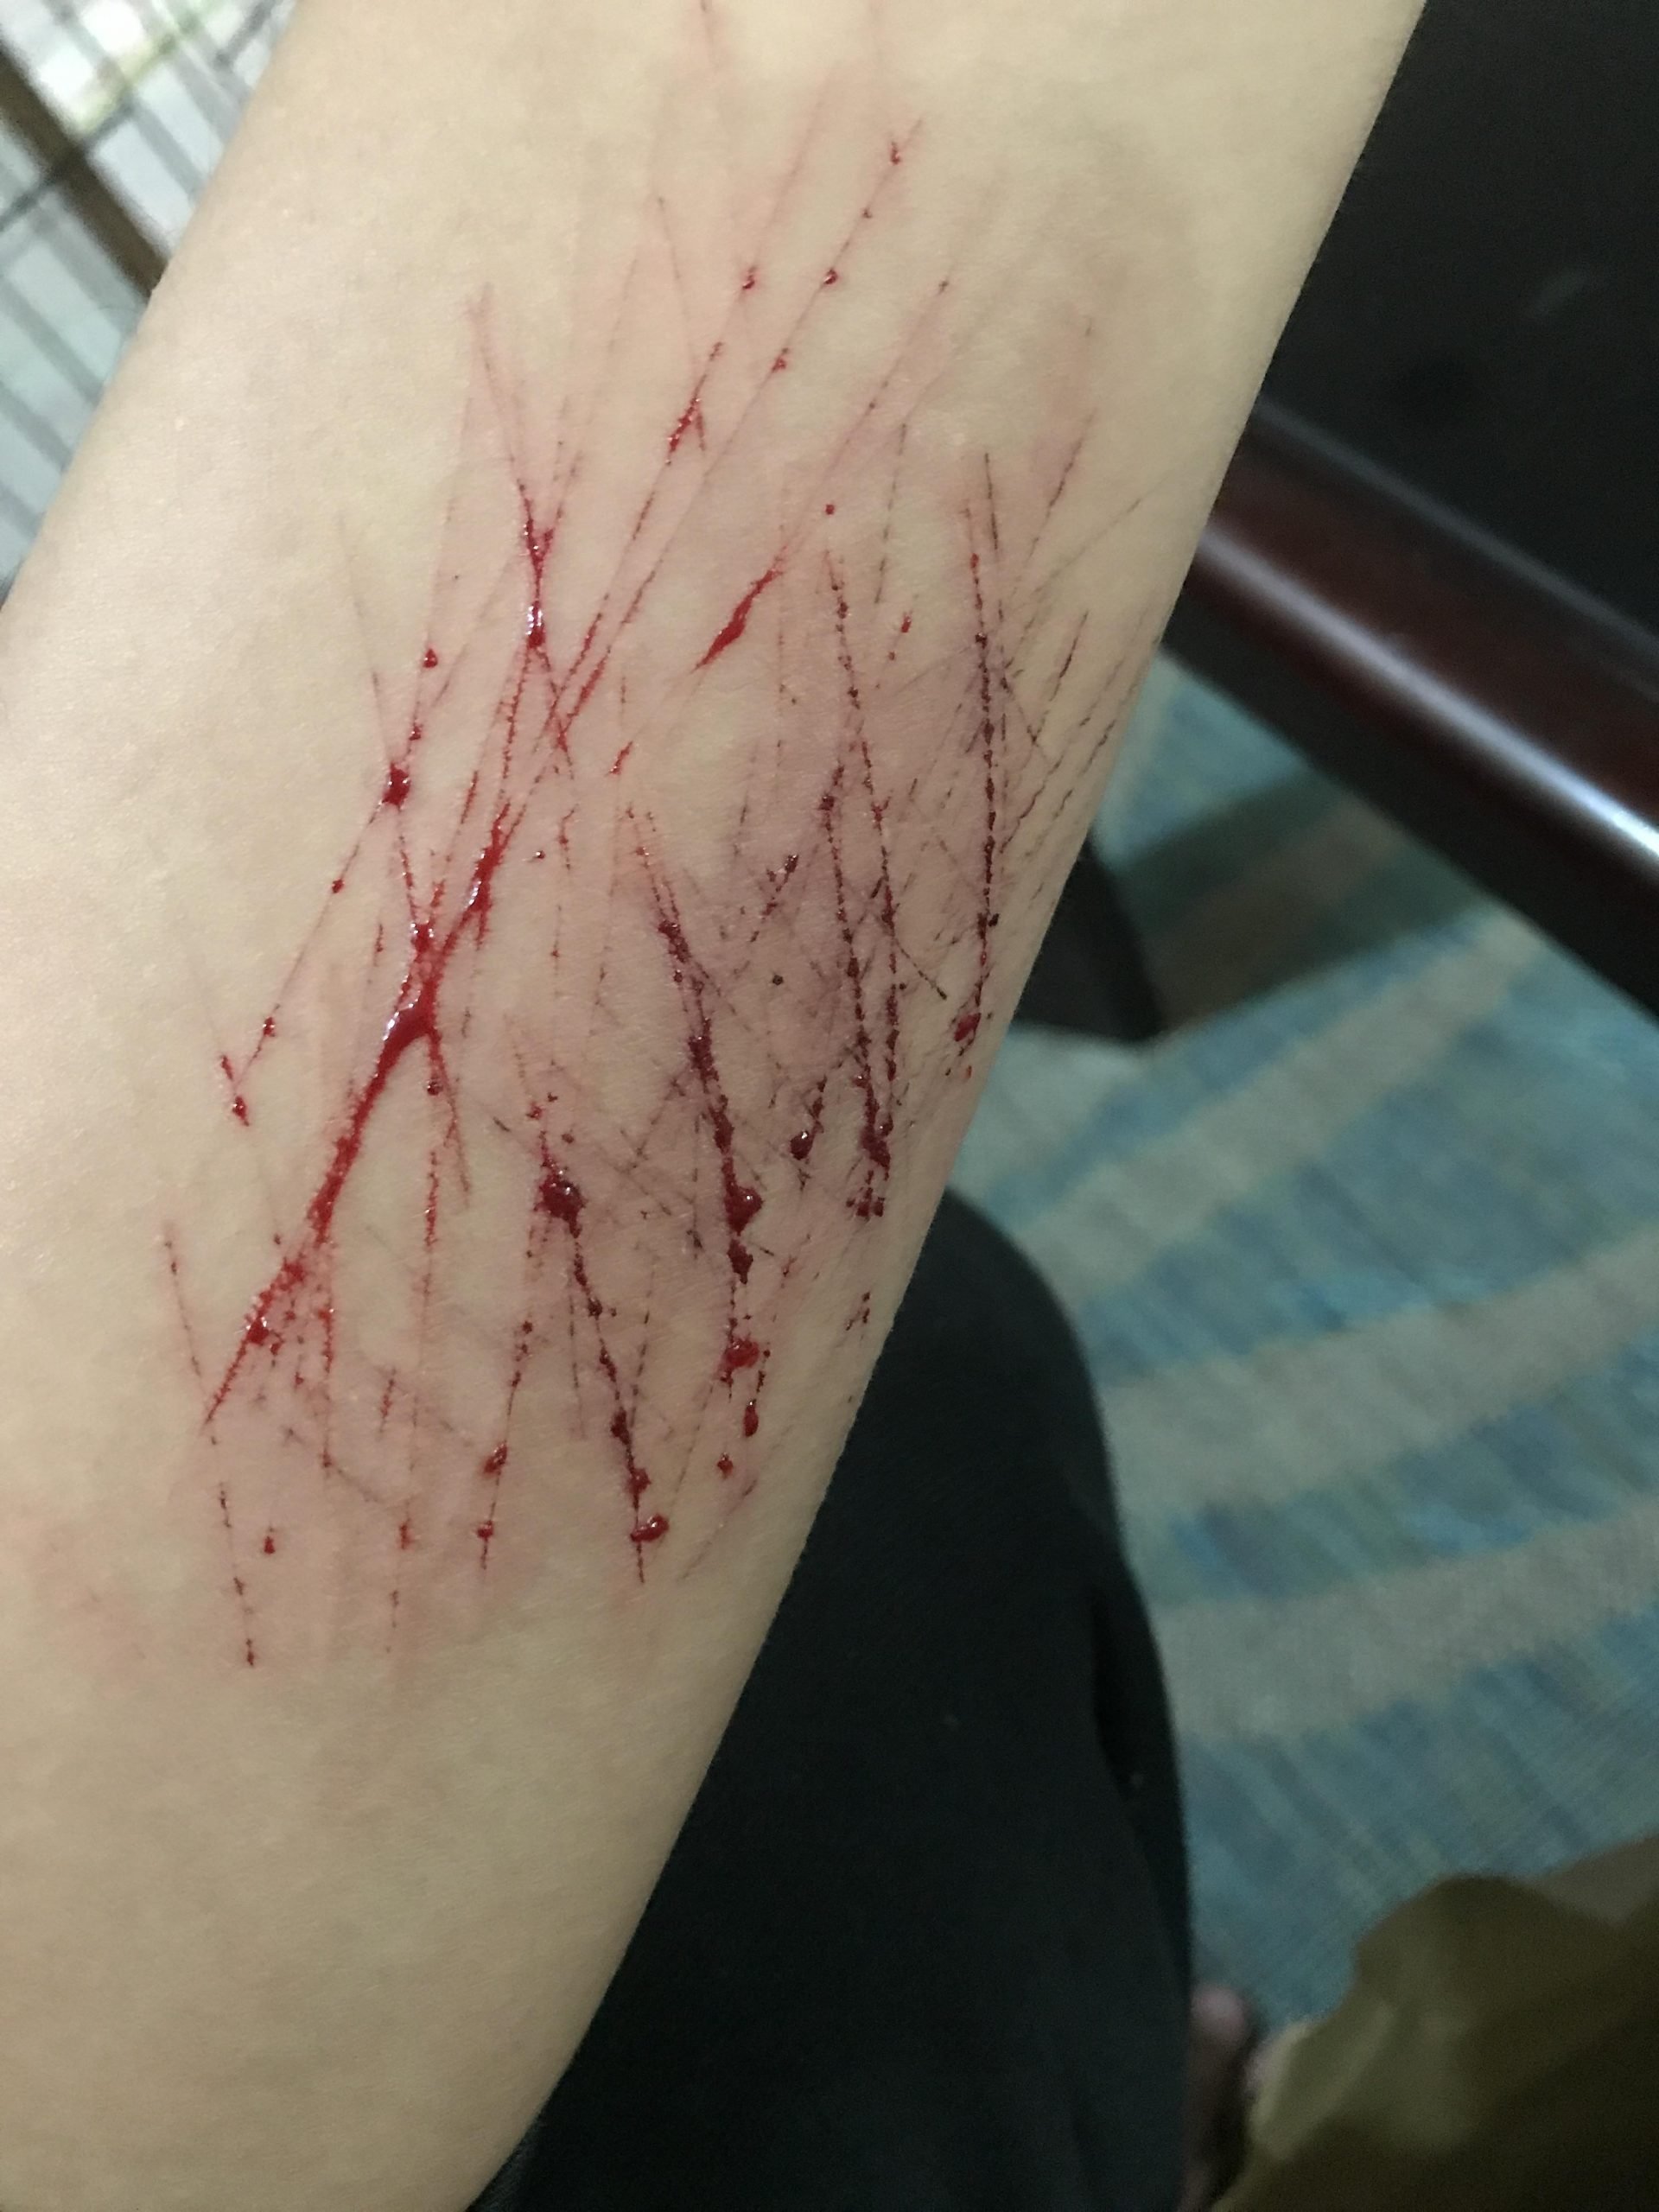 Ive been cutting myself to avoid unnecessary thoughts. I ...